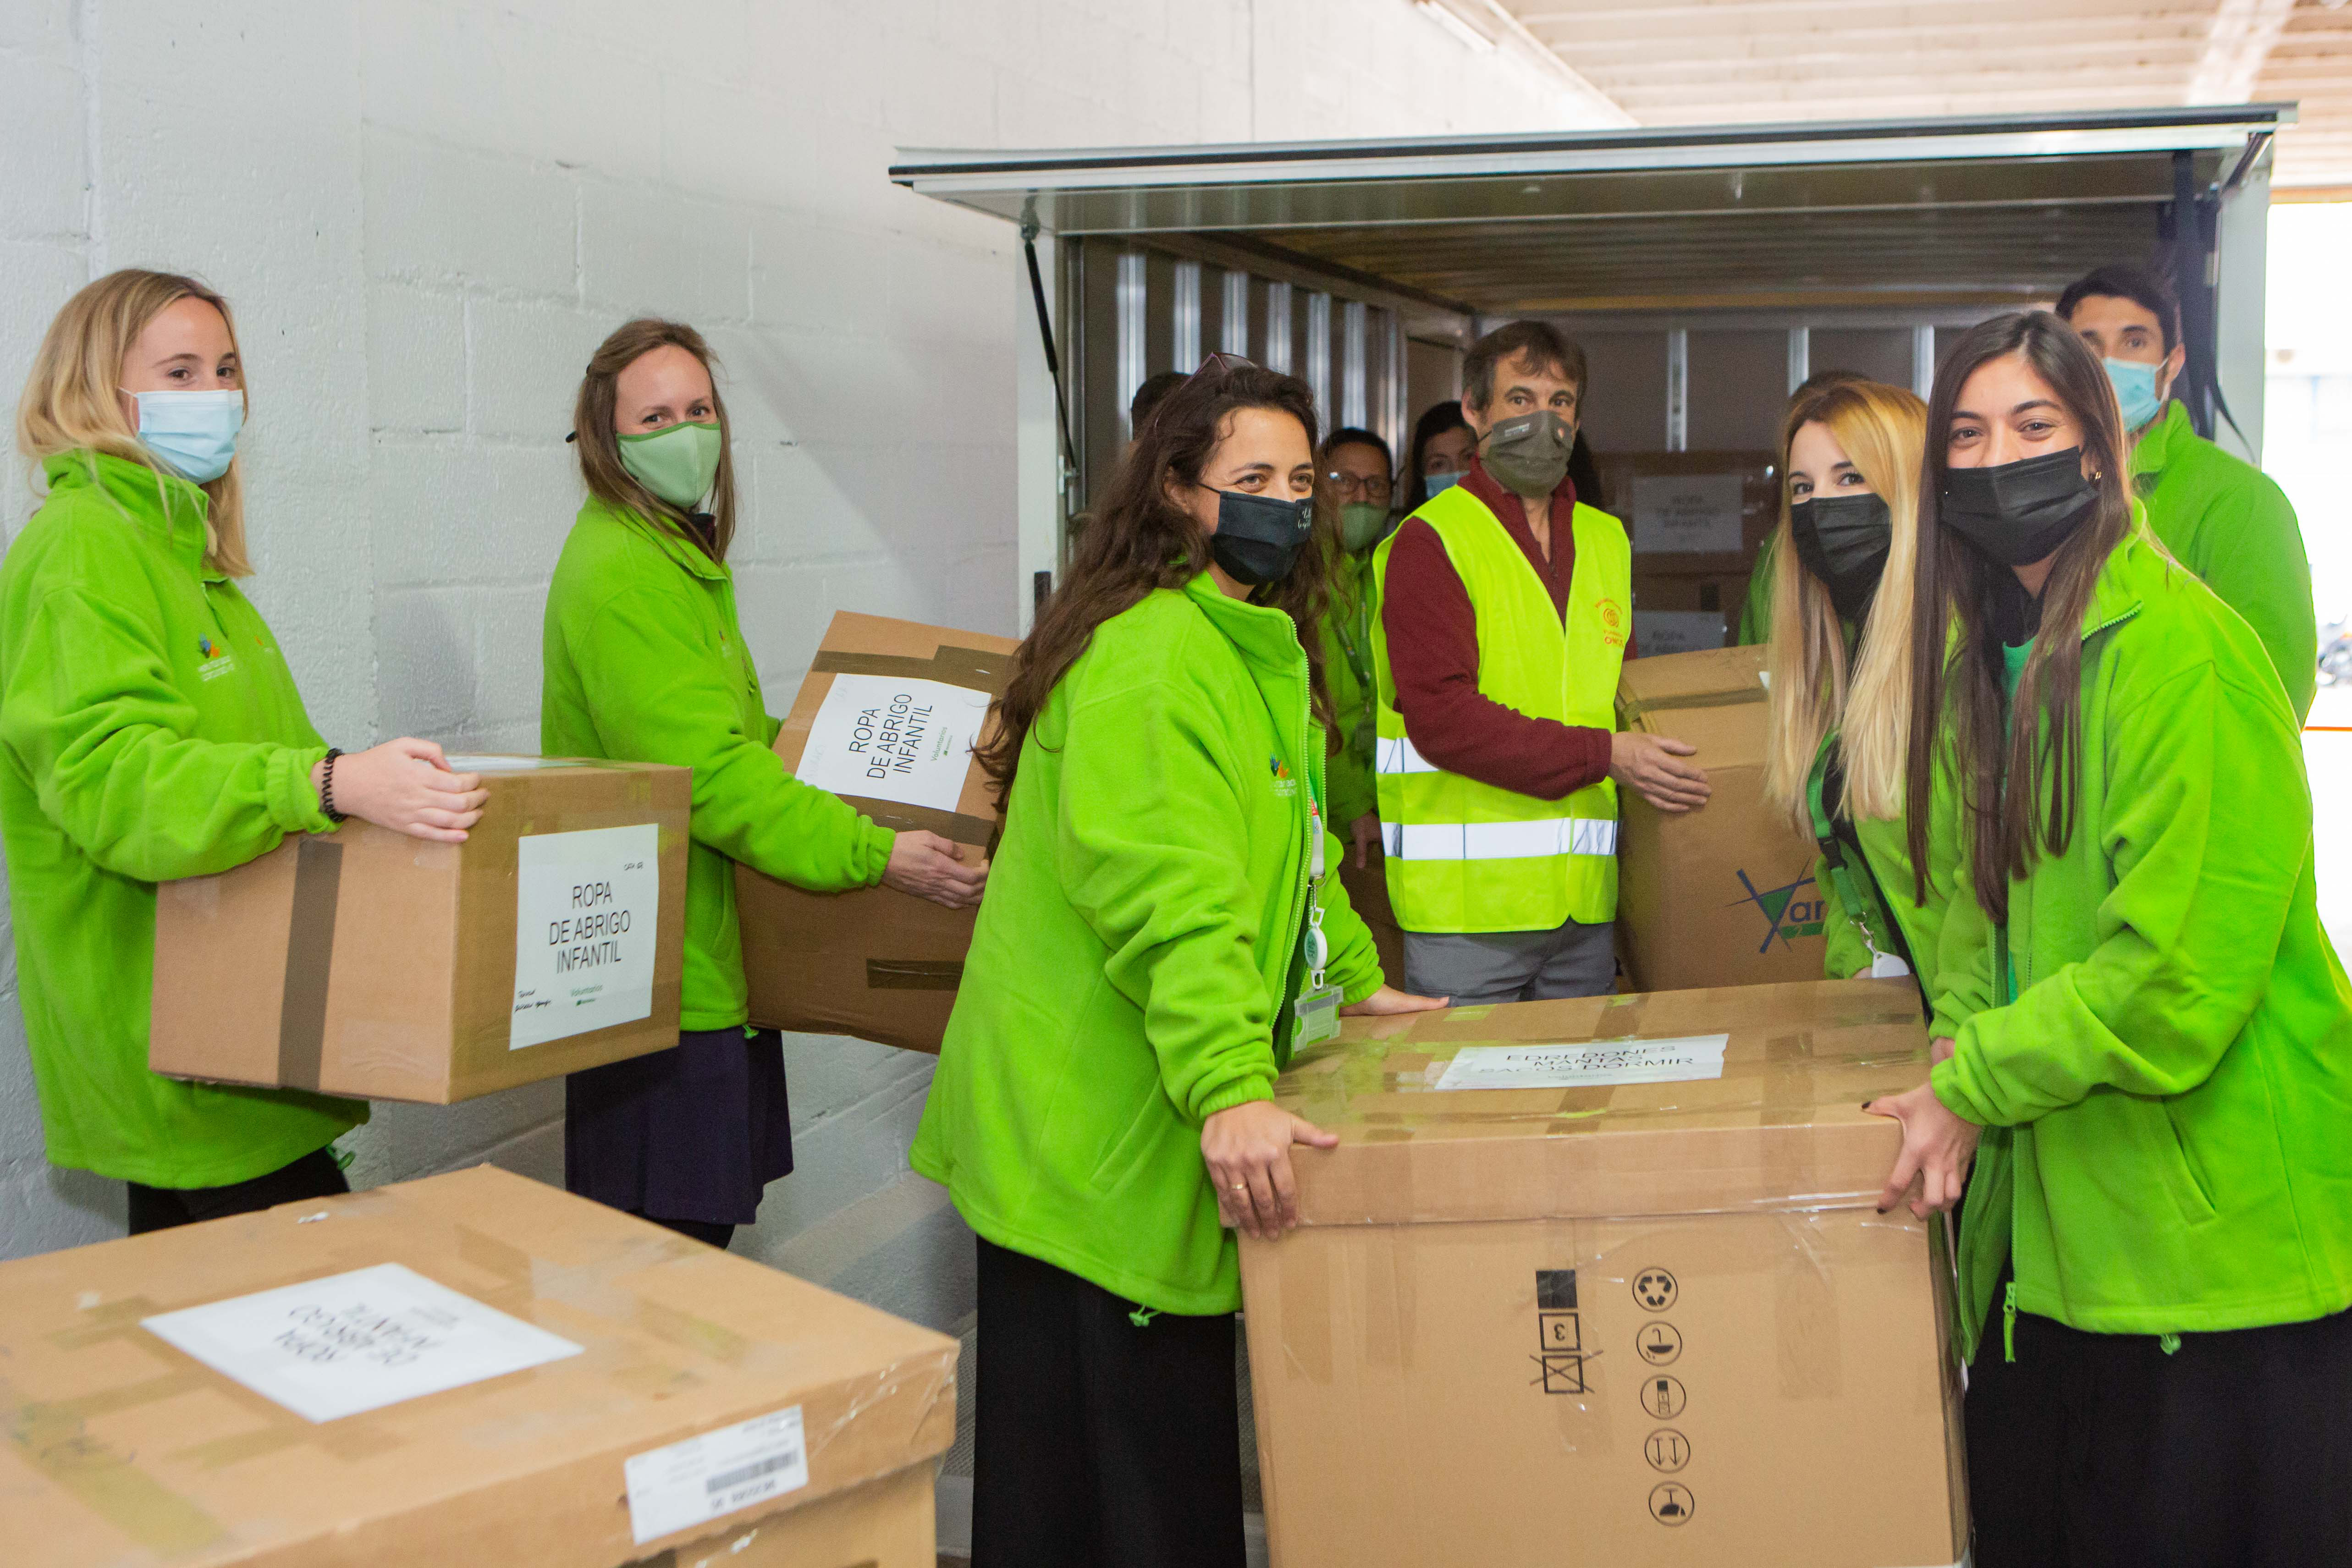 More than 200 Iberdrola volunteers have participated in the collection and distribution of the donated aid